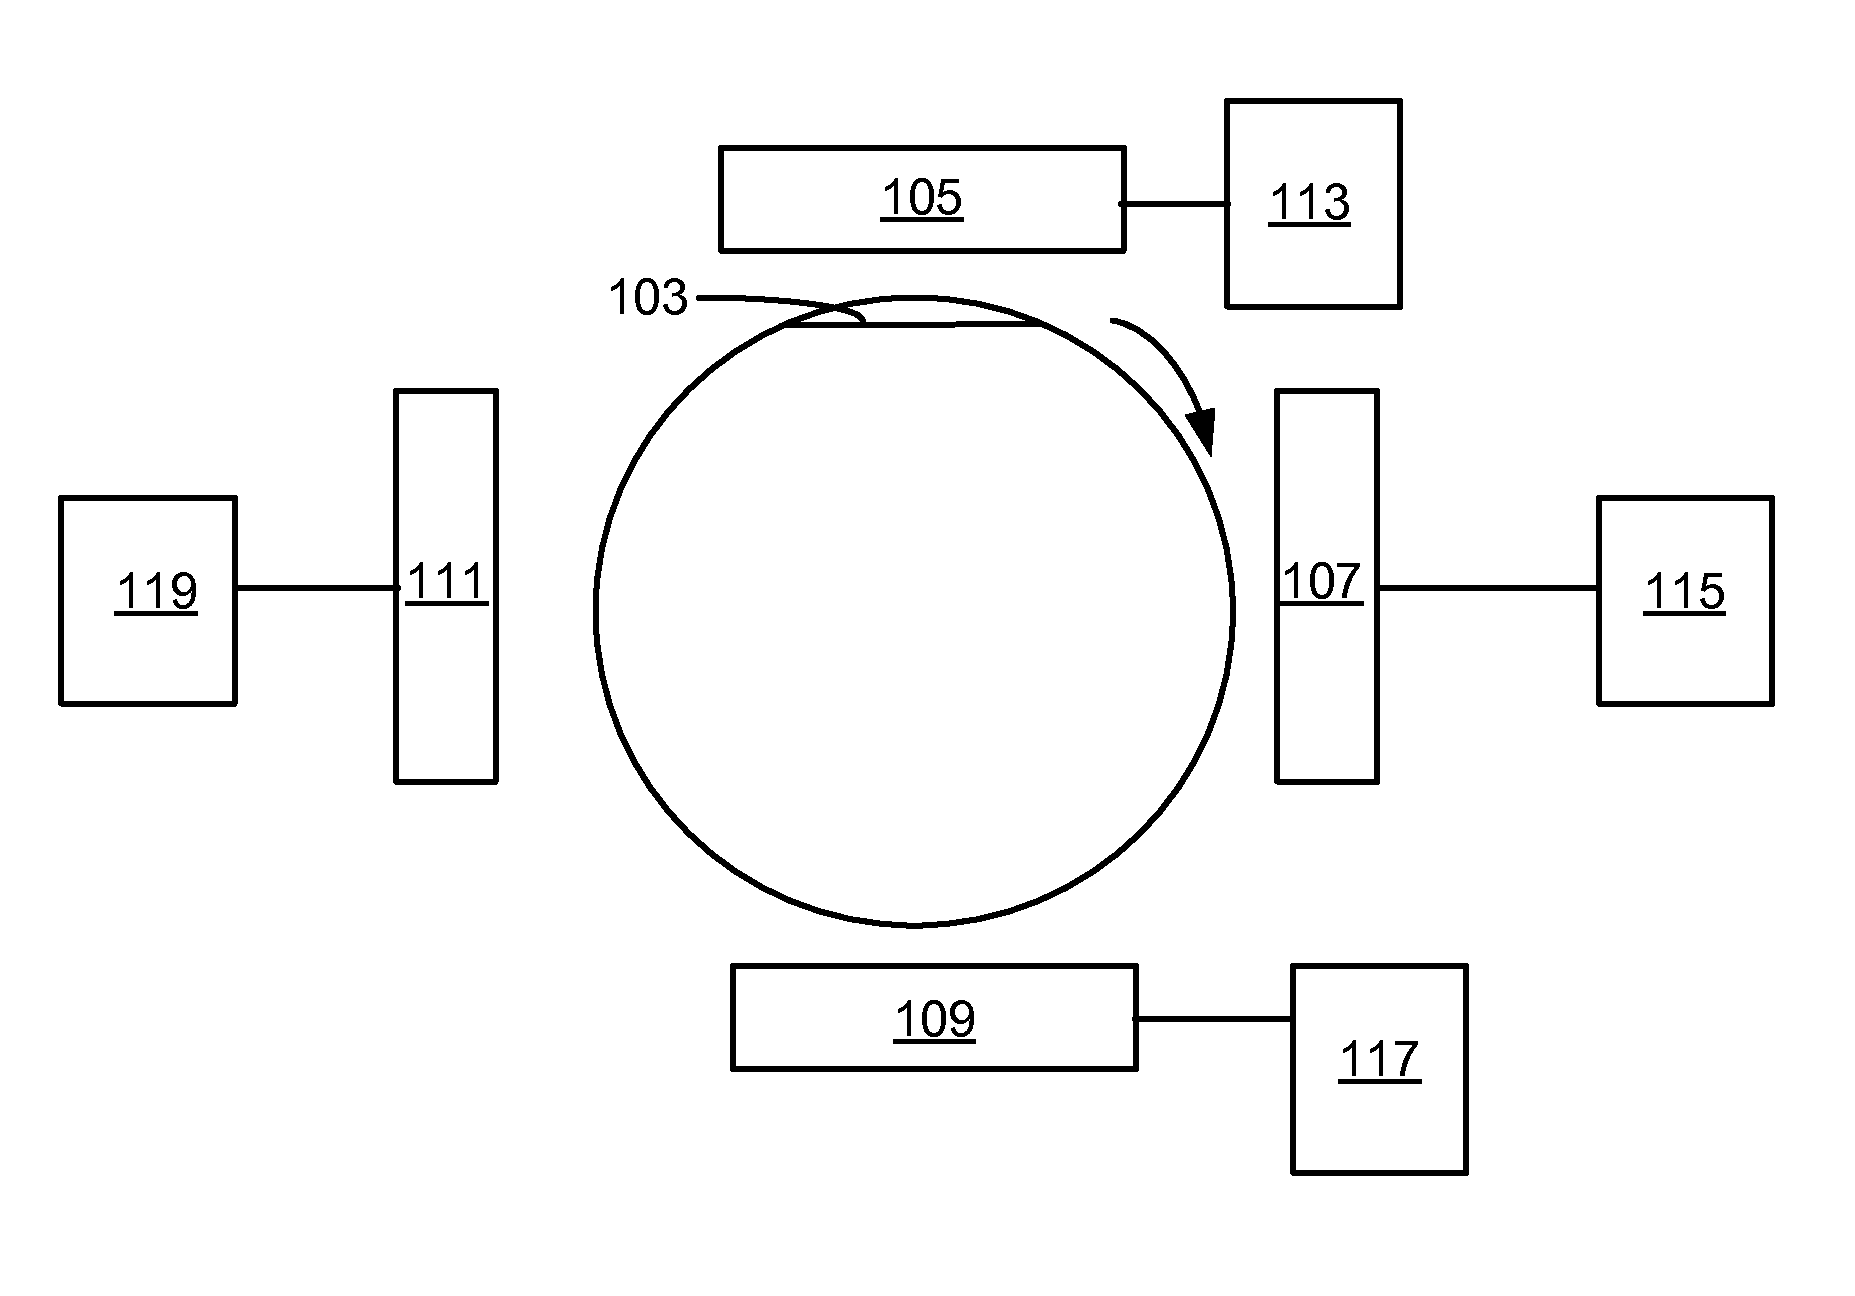 Electroplating apparatus for tailored uniformity profile